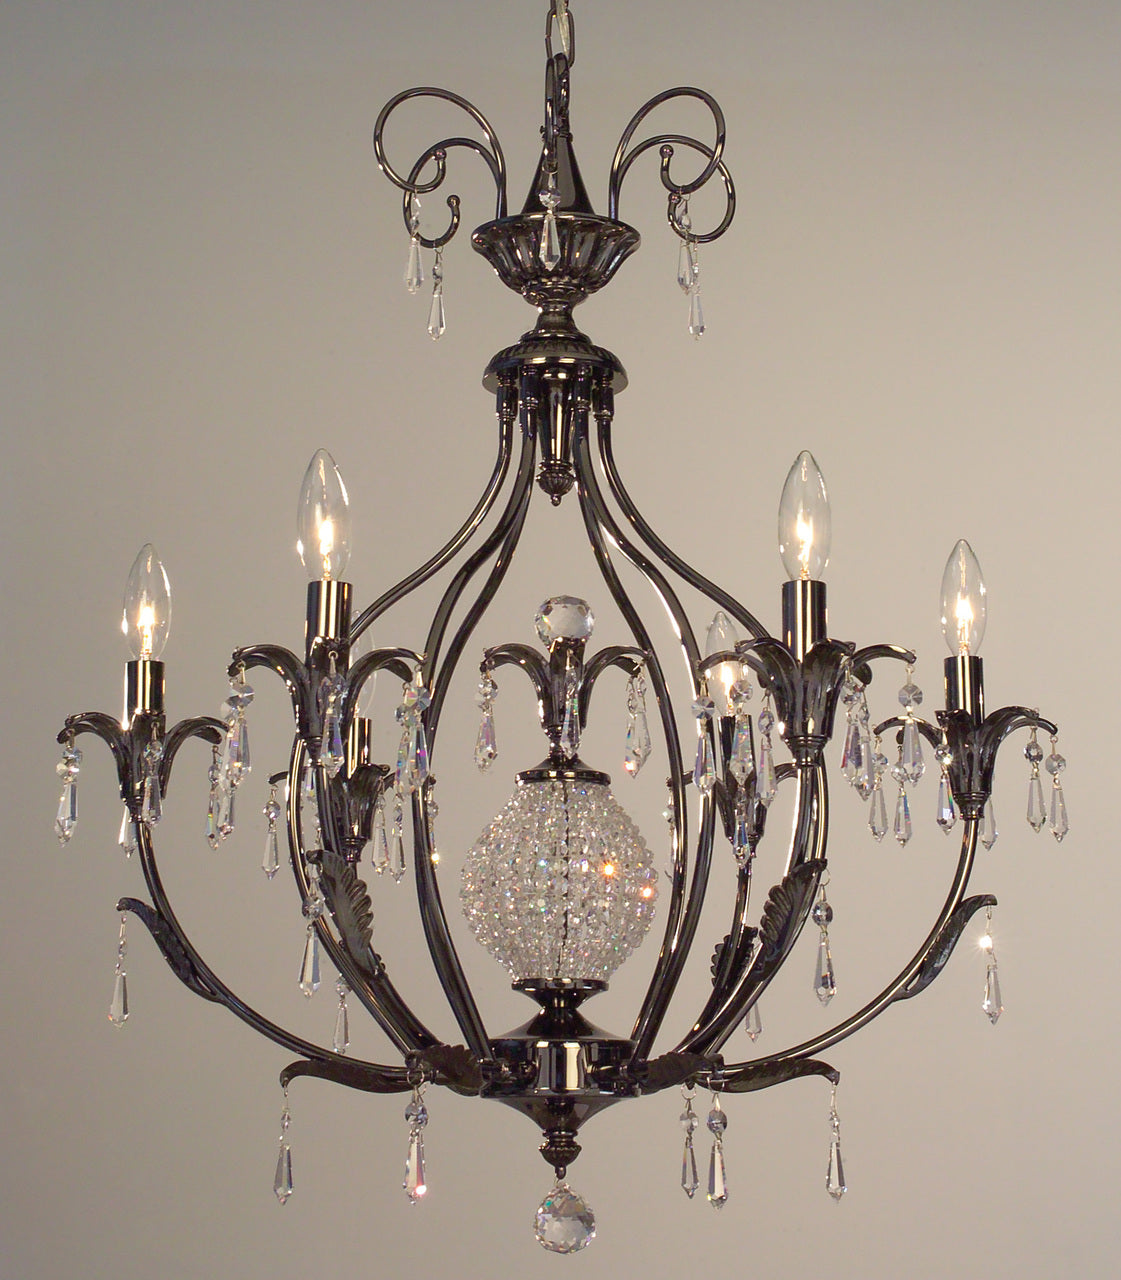 Classic Lighting 16118 ABR CP Sharon Crystal Chandelier in Antique Brass